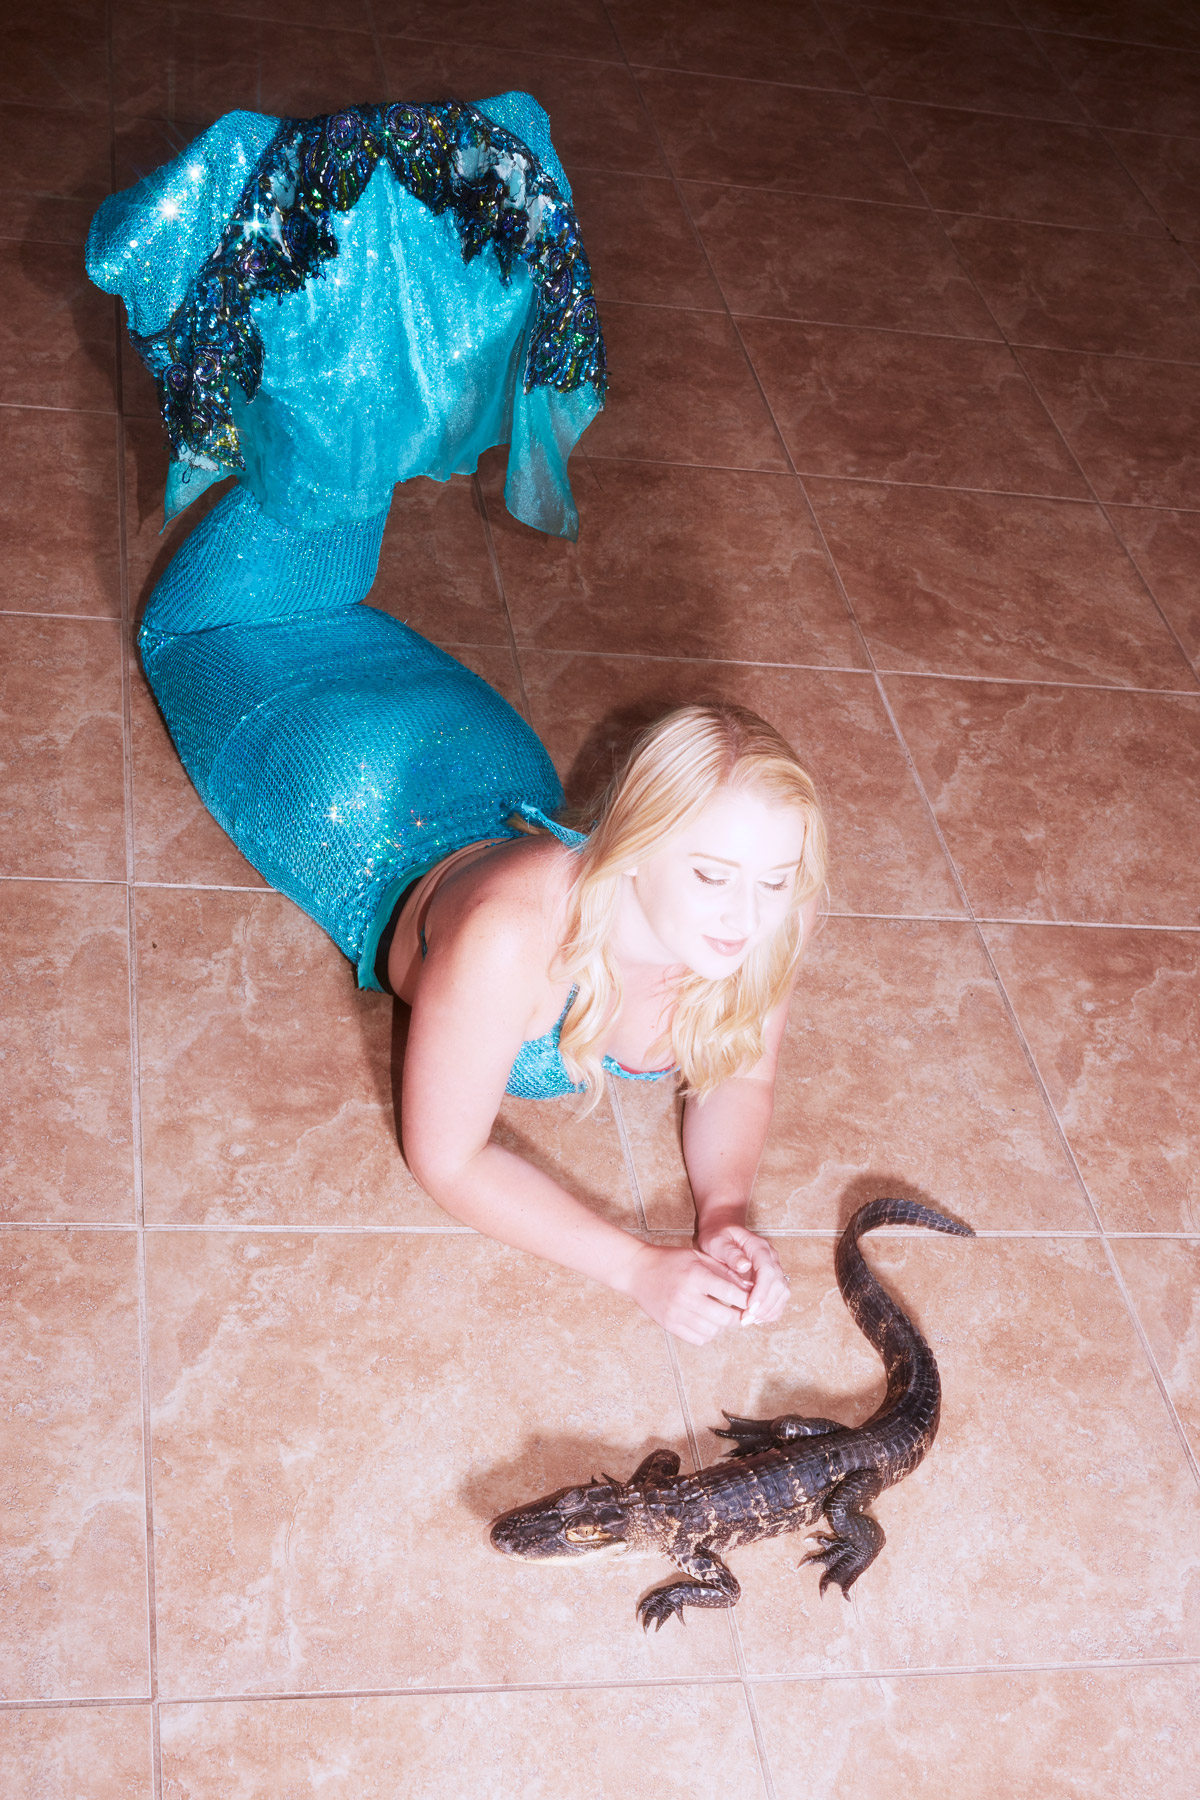 glorious mermaids charlie engman florida mermaid laying on floor playing with small alligator